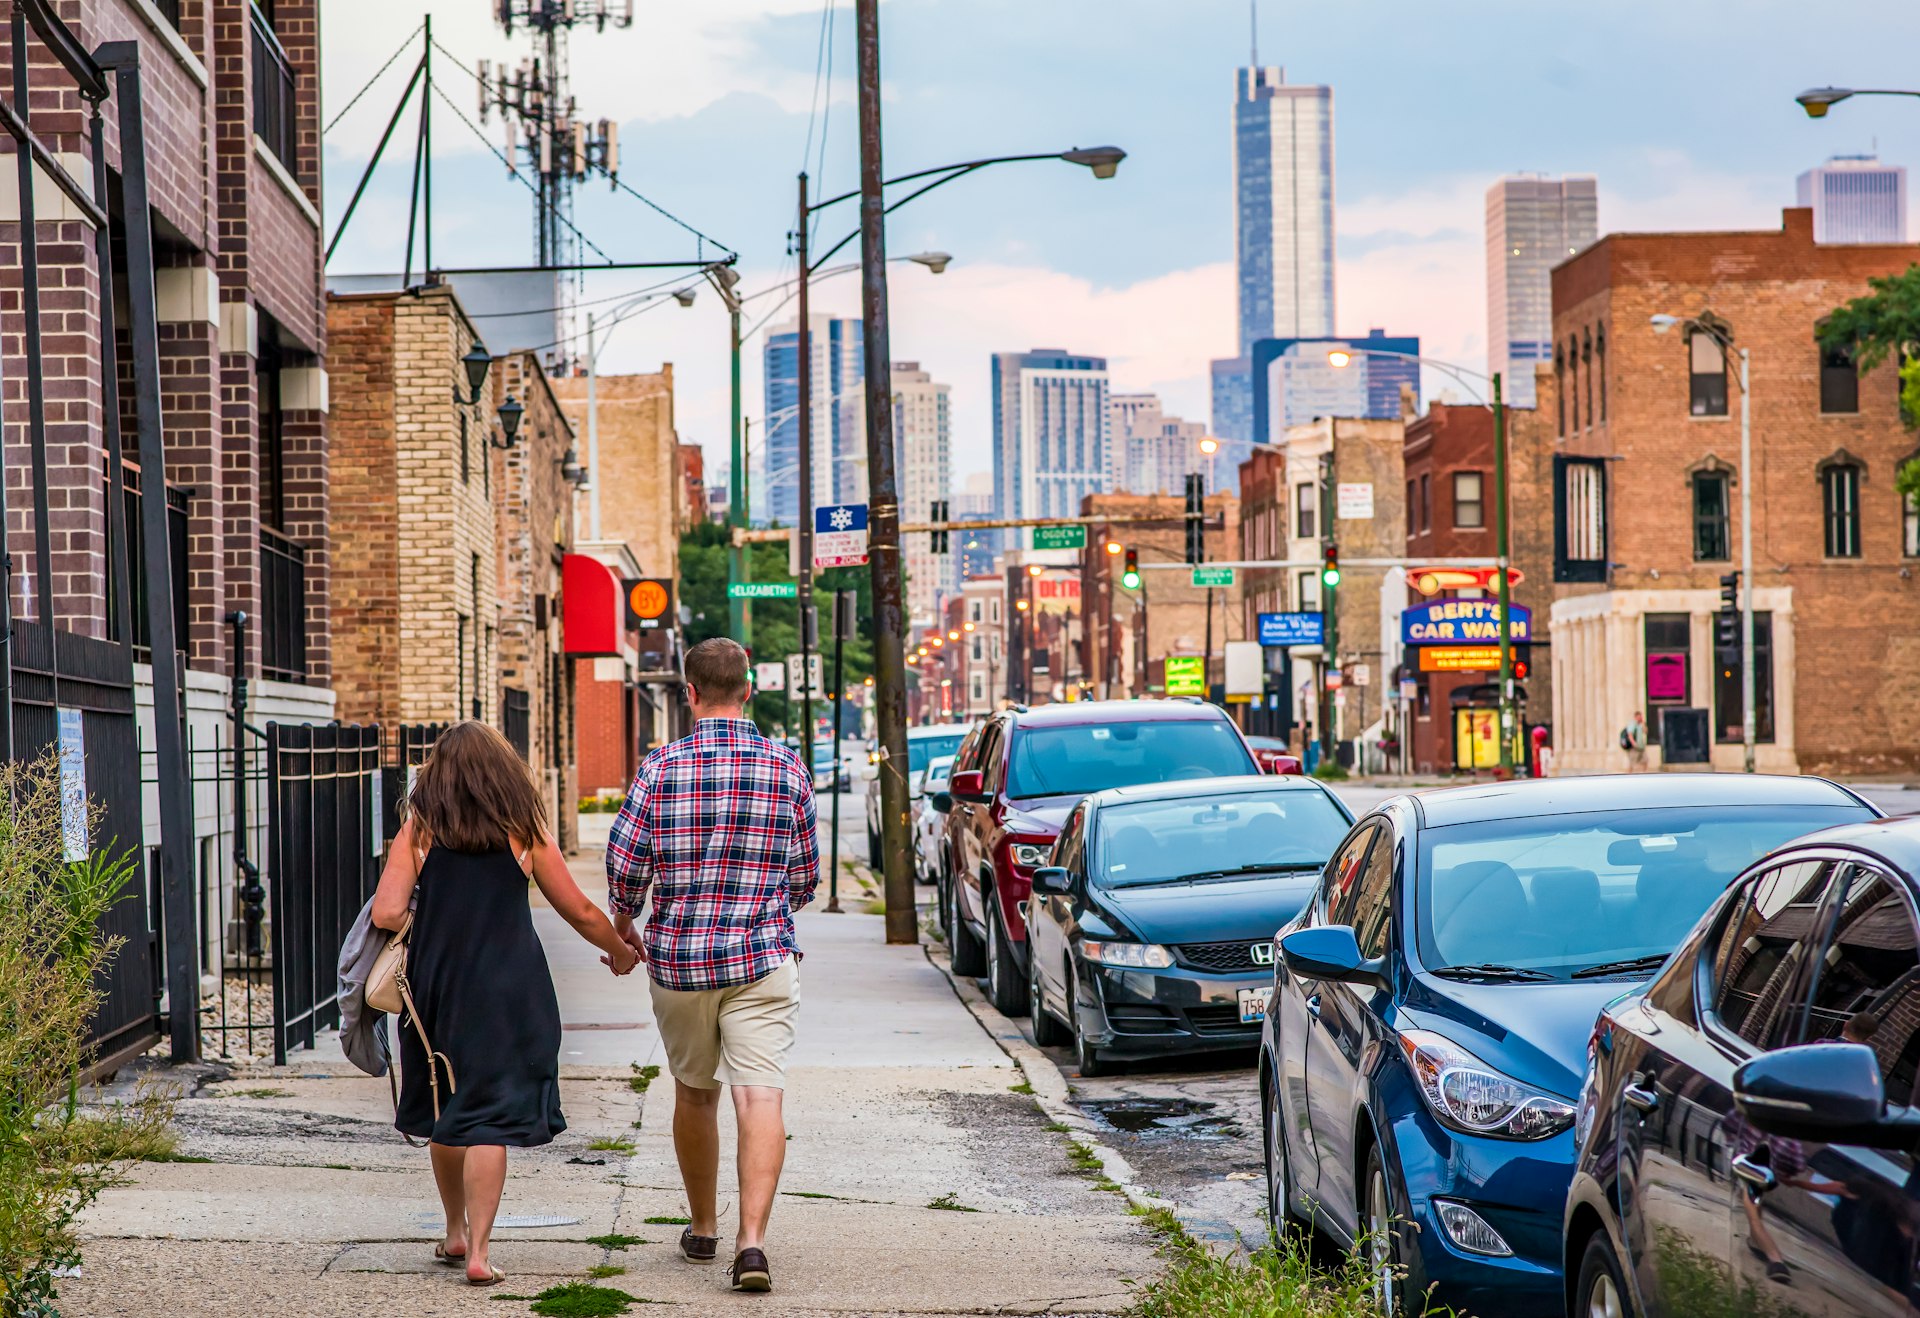 Young couple enjoying the evening in West Town Chicago, skyline behind them.